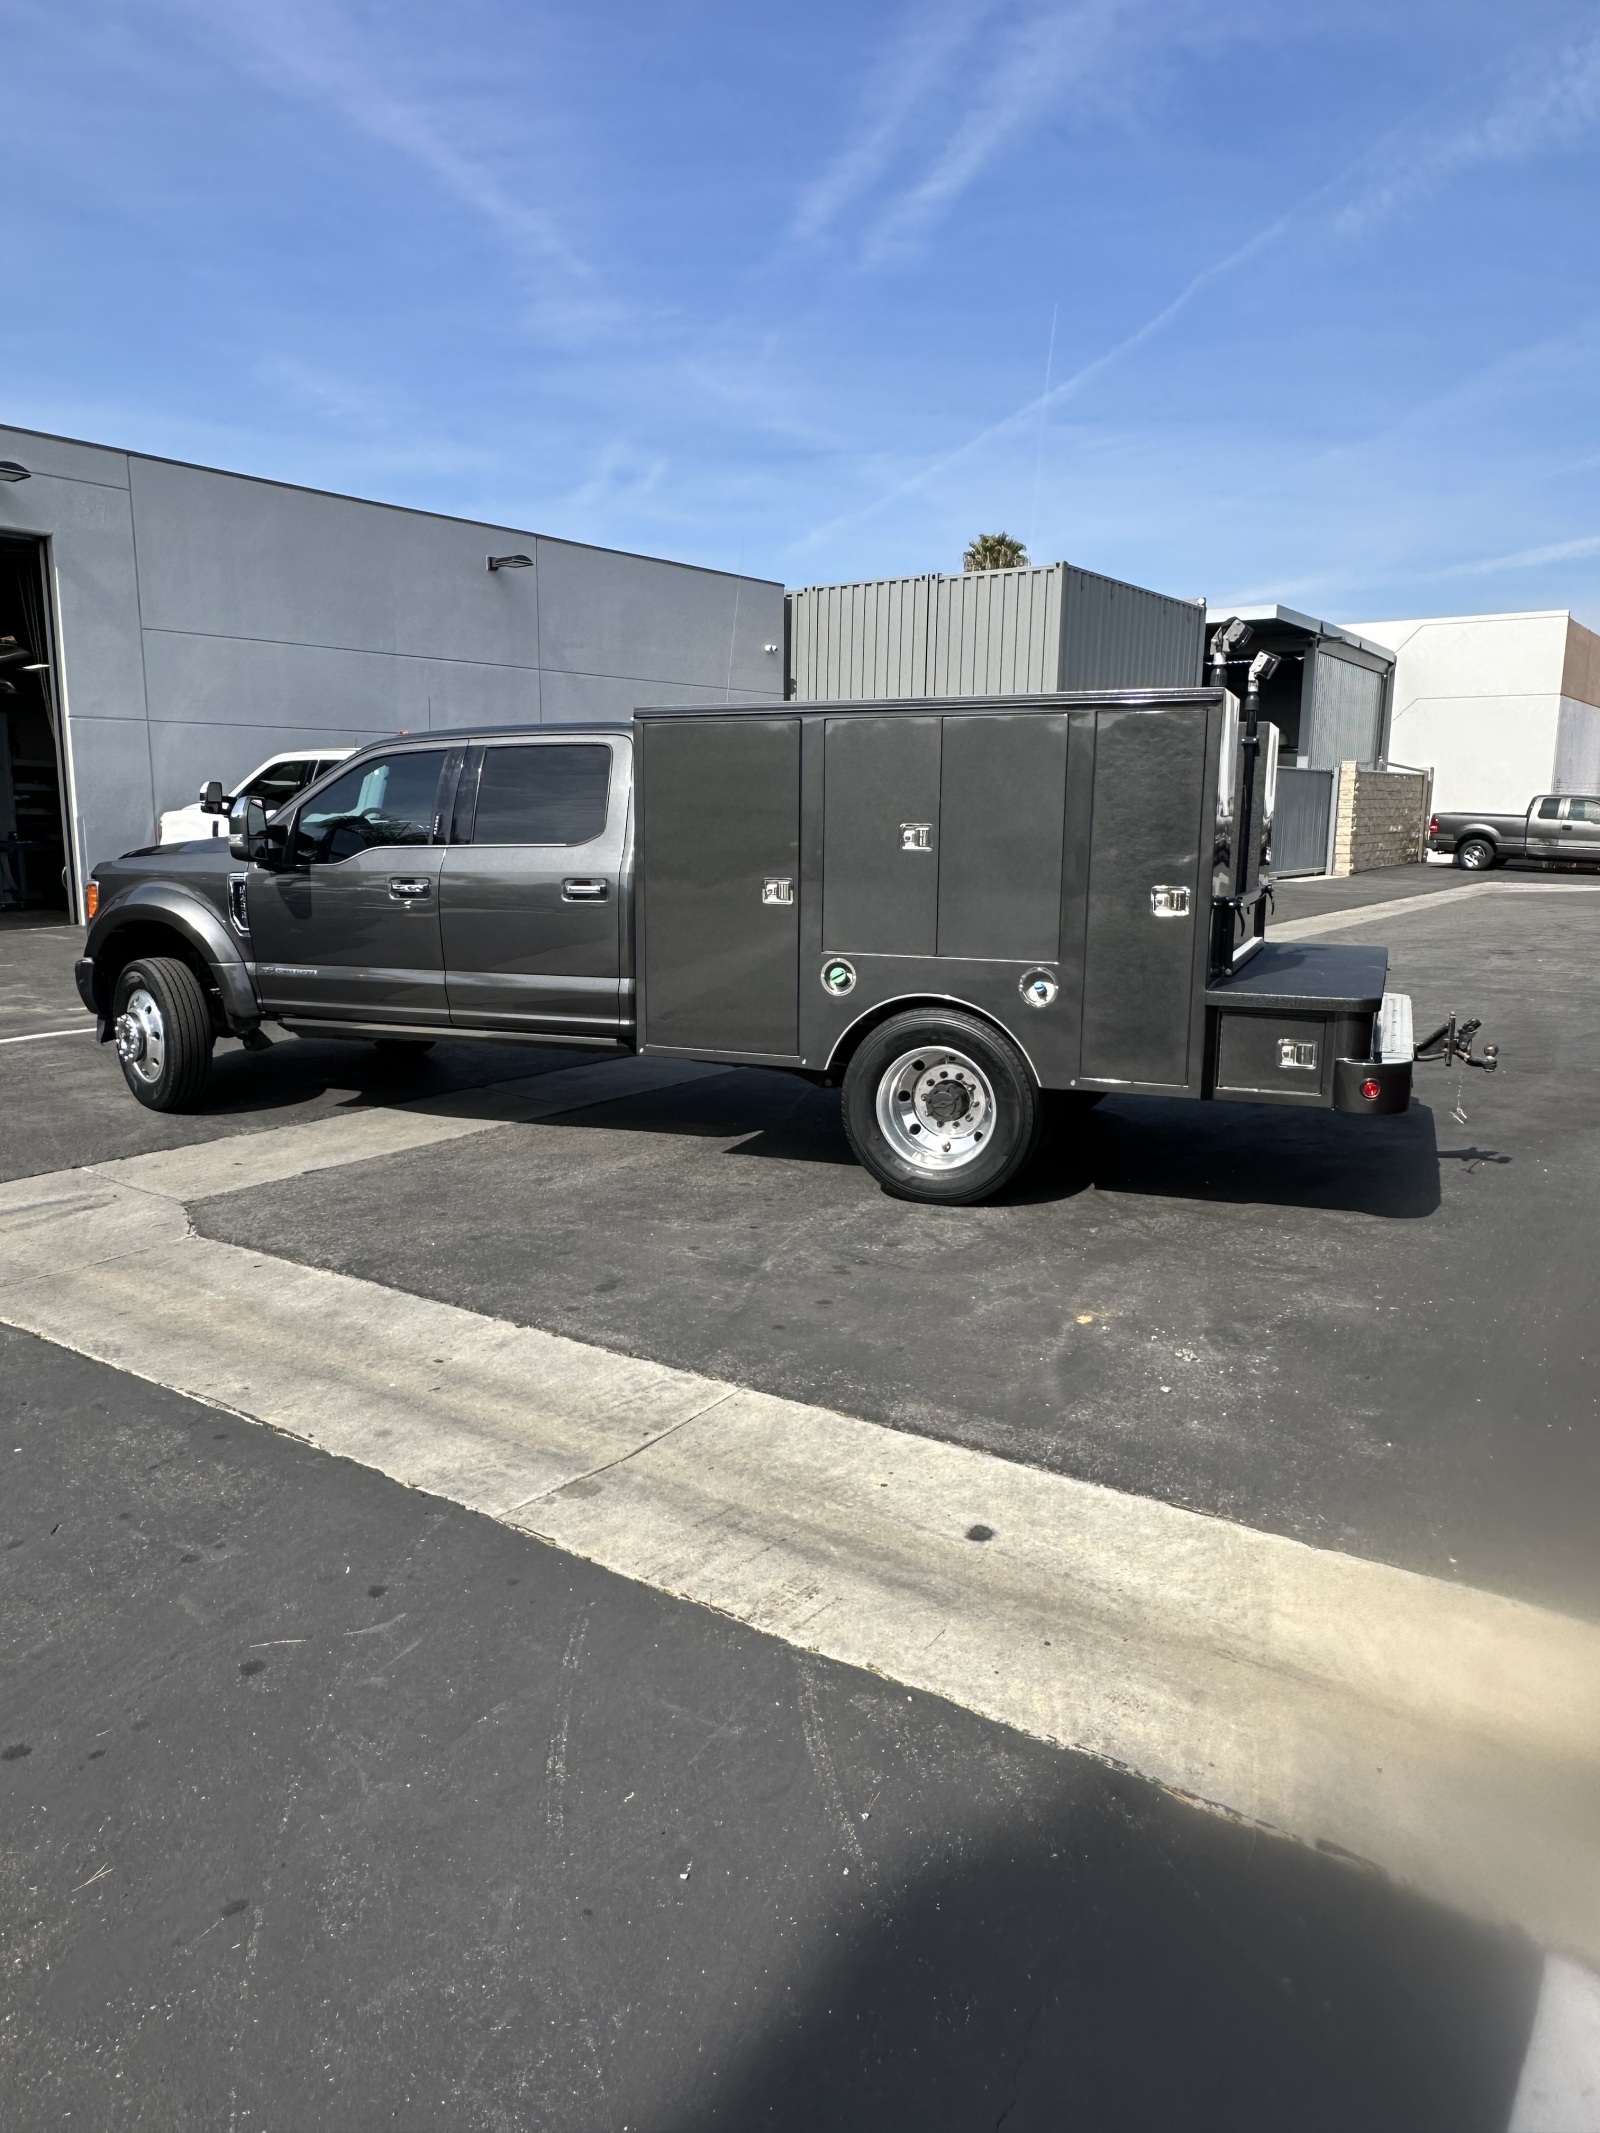 For Sale: 2017 Ford F450 Platinum Chase Truck - photo1